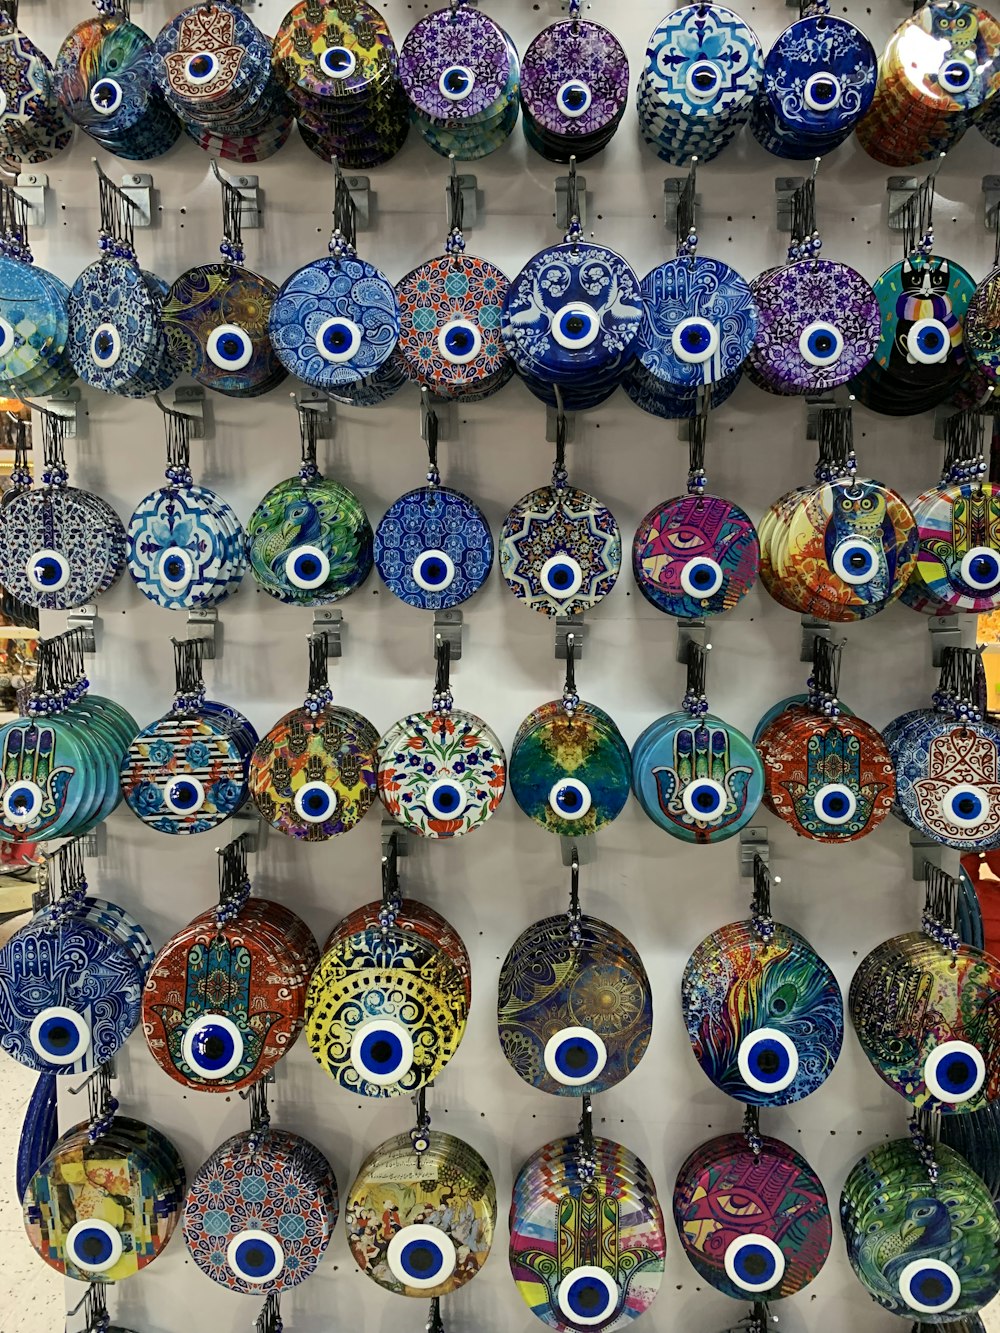 a display of evil looking glass ornaments on a wall